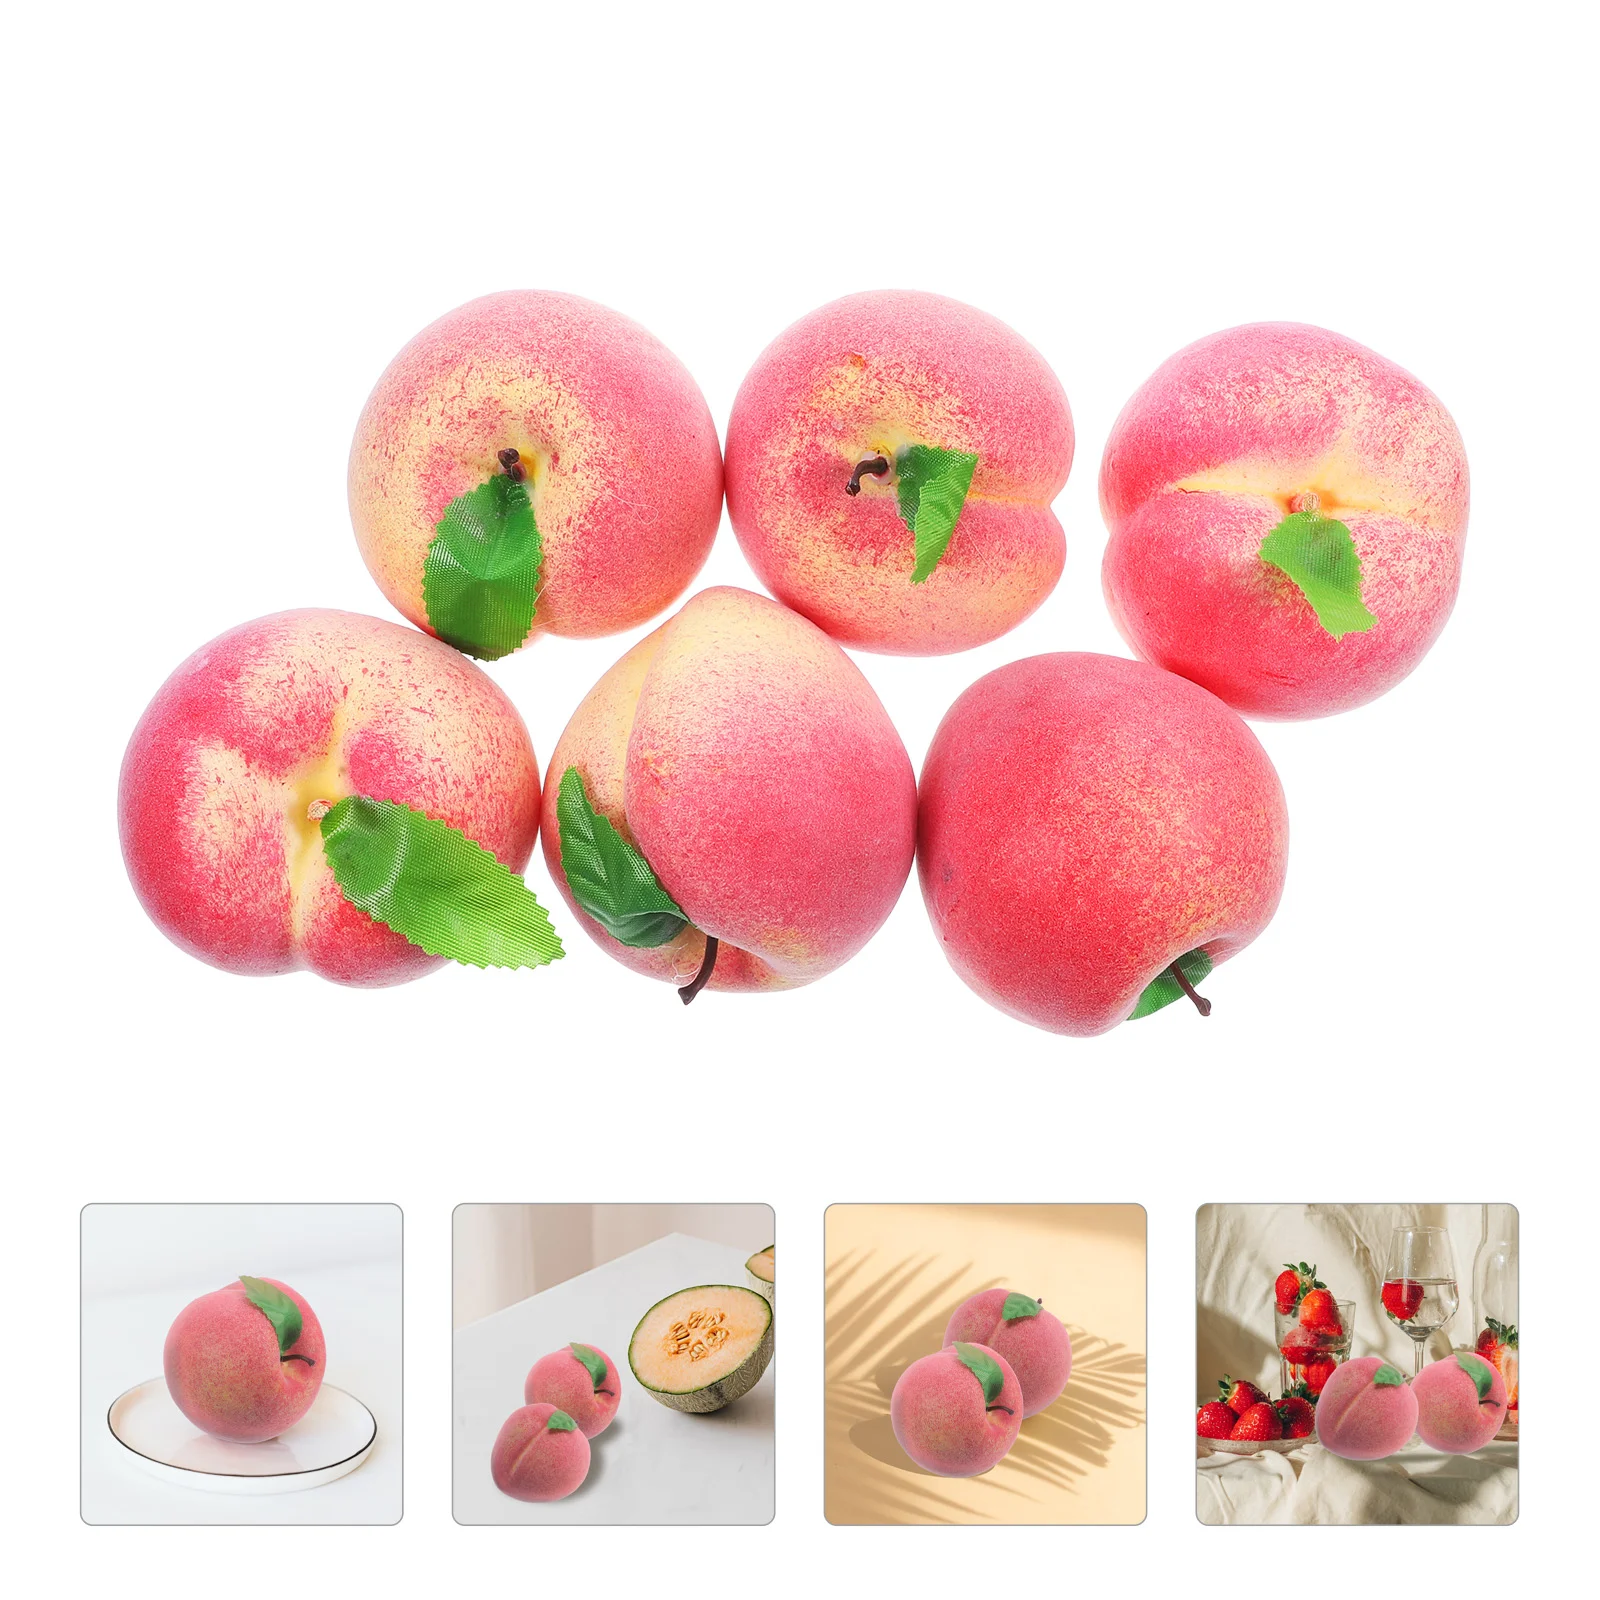 

Artificial Fruit Peach Tiny Prop Miniature Toy Model Displaying Photo Props Decor Fruits Decoration Lifelike Toys